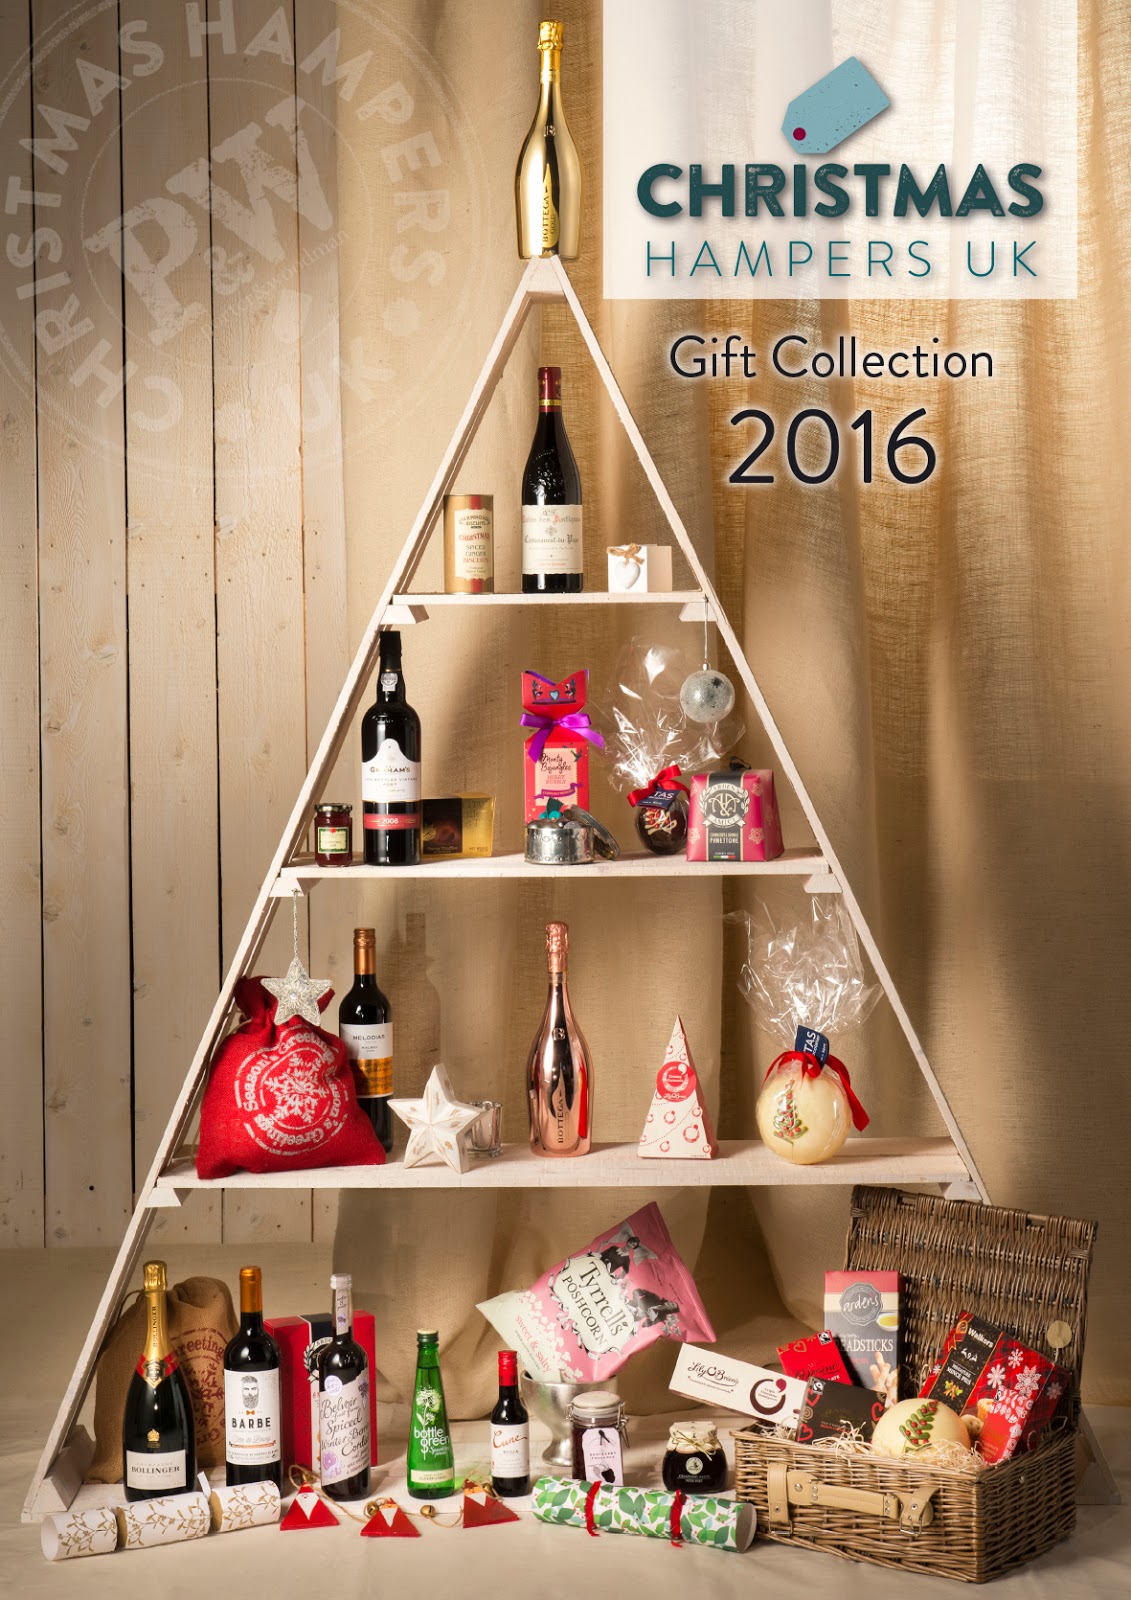 Christmas Hampers UK: Christmas Hampers UK 2016 Brochure Launched